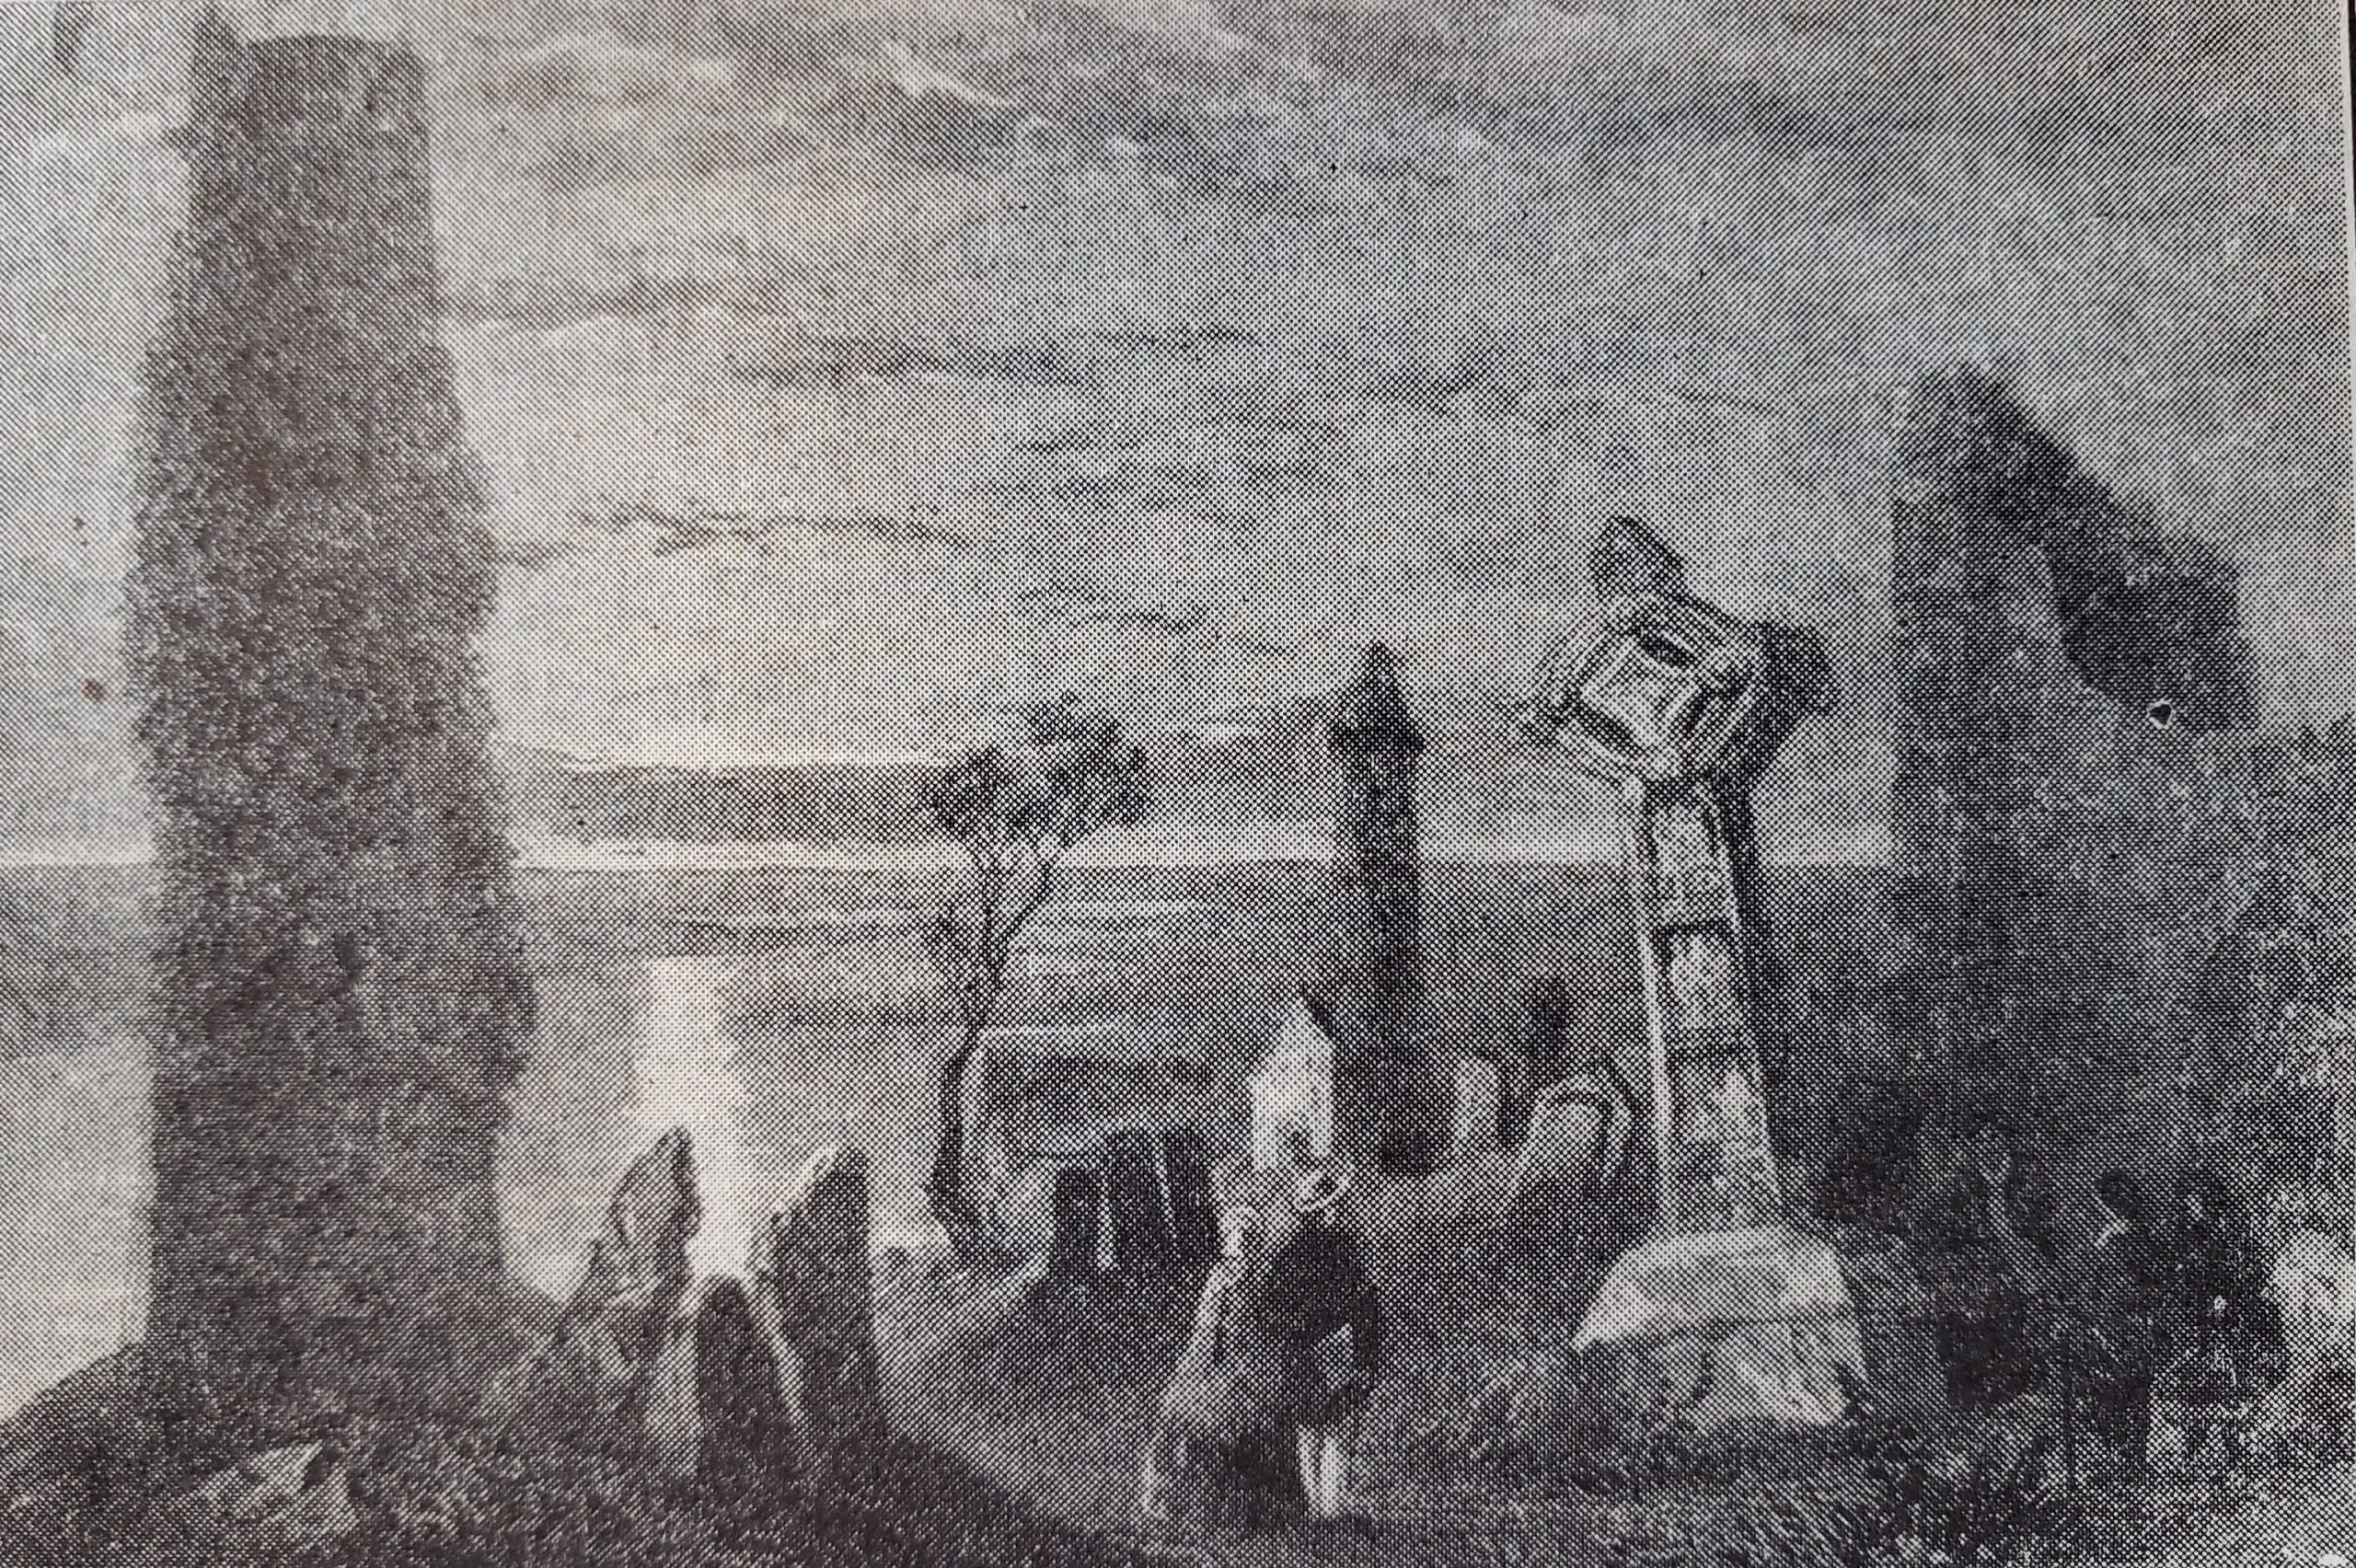 CLONMACNOISE, IRELAND (From an Irish wood engraving.) Once a famous monastery and school, founded in 544. The round towers served as a refuge during time of invasions. Their door was commonly high above the ground. Note the “Celtic Cross.” Many personages great in Irish history rest under these tombstones.